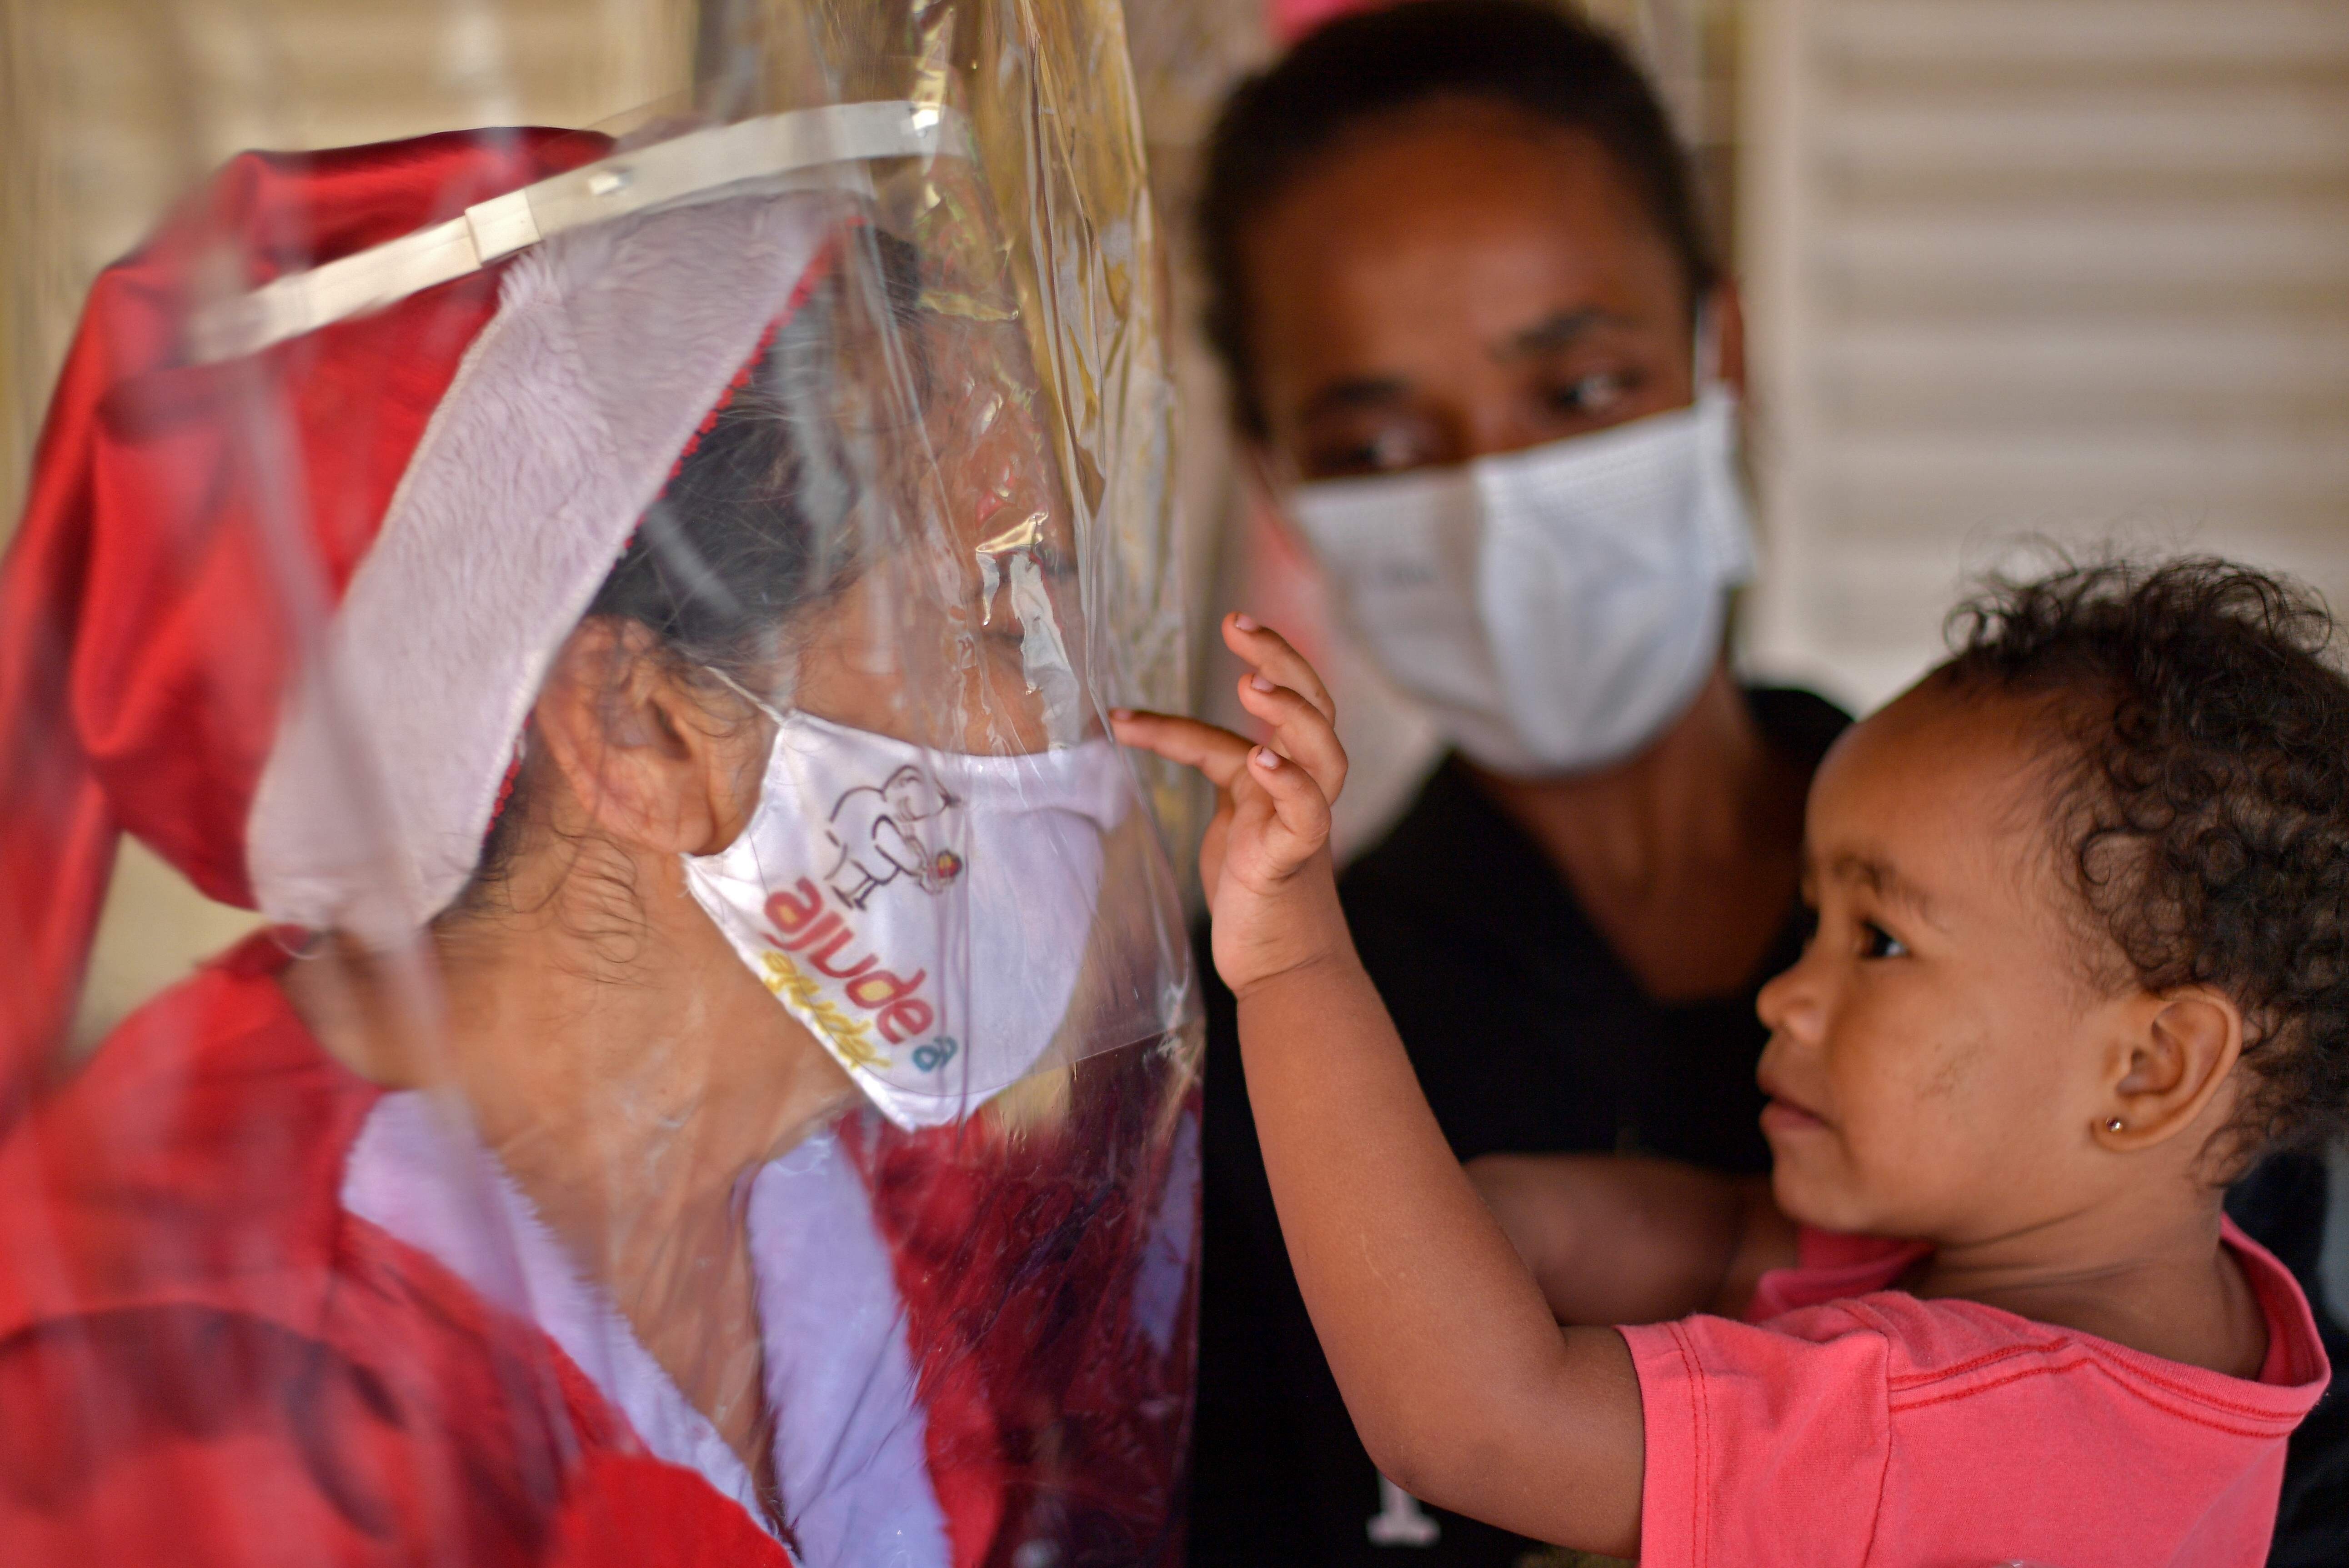 A child touches volunteer Fatima Sanson, dressed up as Mrs Claus, in Belo Horizonte, Minas Gerais state, Brazil, on December 7. Sanson delivers gifts and hugs to needy children every Christmas, but due to the coronavirus pandemic, this year she built an embrace curtain to allow children to touch her, keeping everyone safe. Photo: AFP